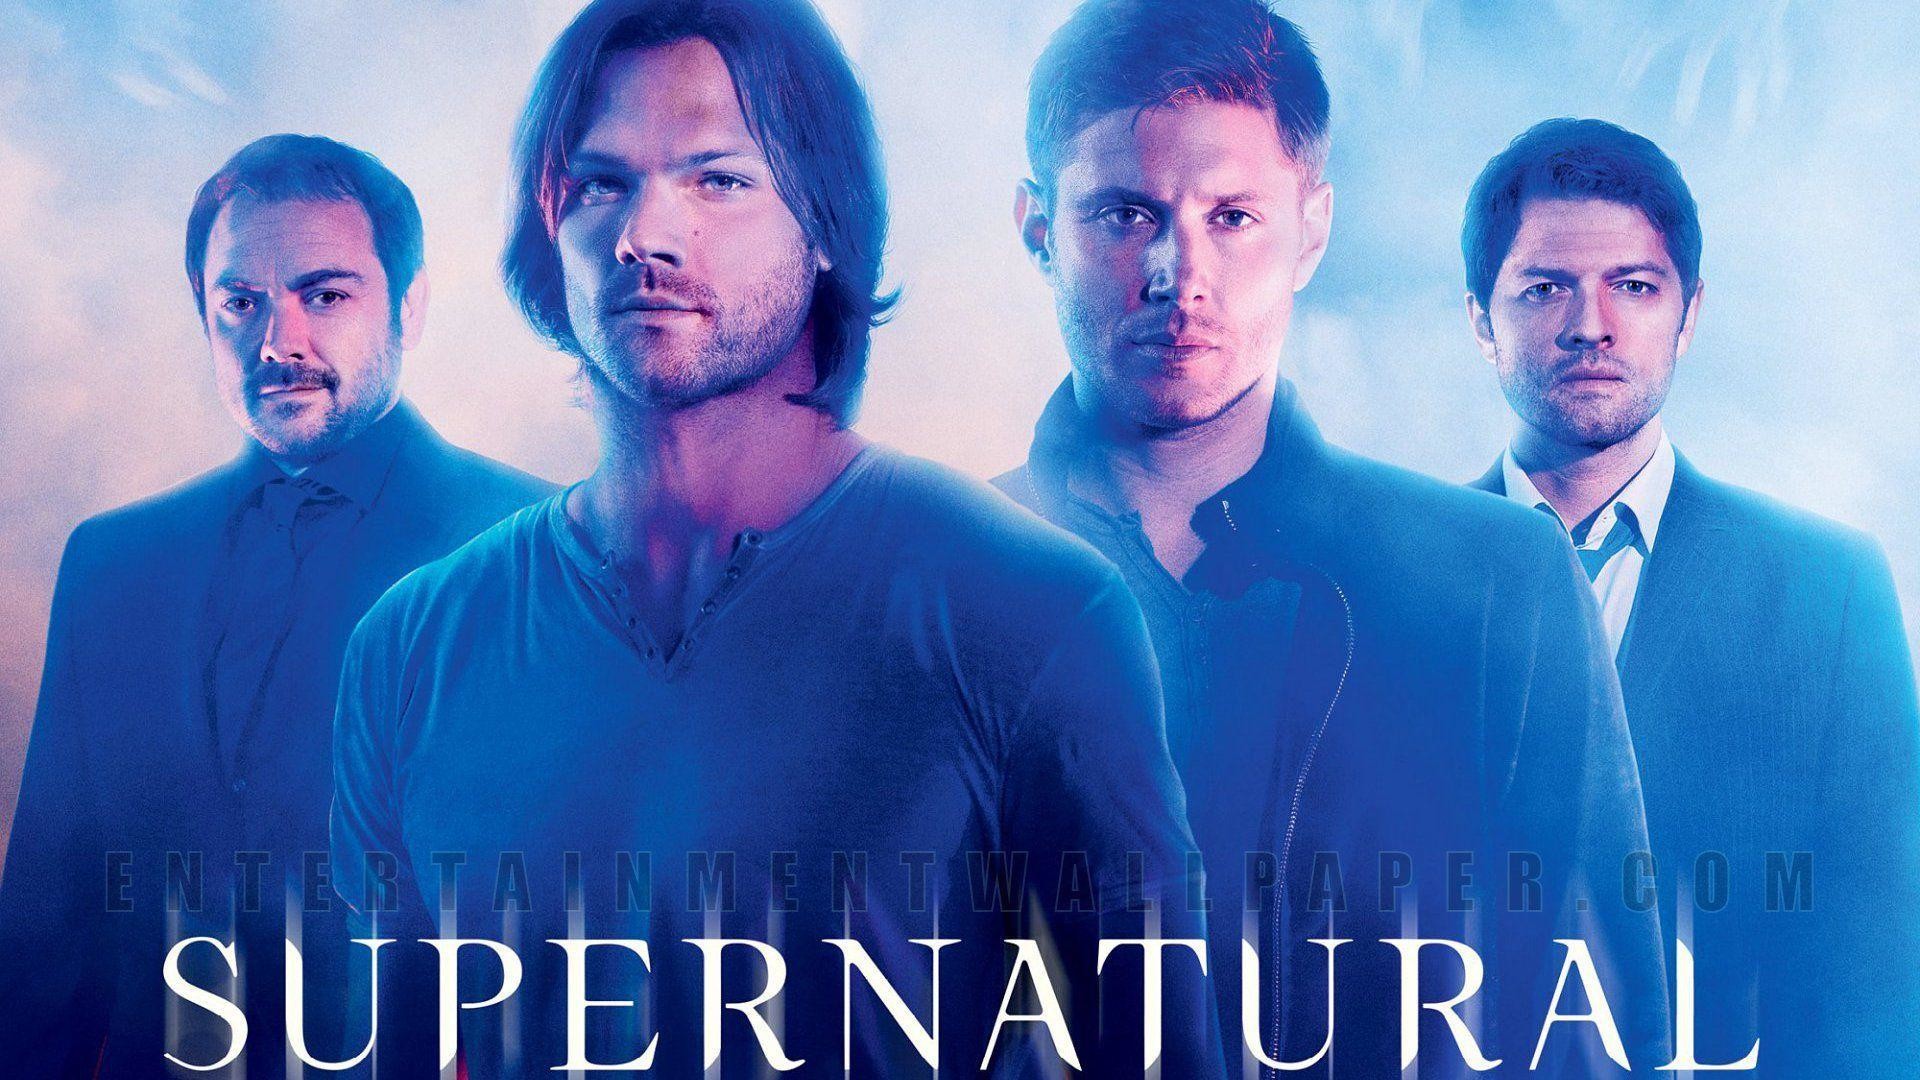 1920x1080 Supernatural wallpapers Gallery| Beautiful and Interesting  Images,Vectors,Coloring,Cliparts |Free Hd wallpapers